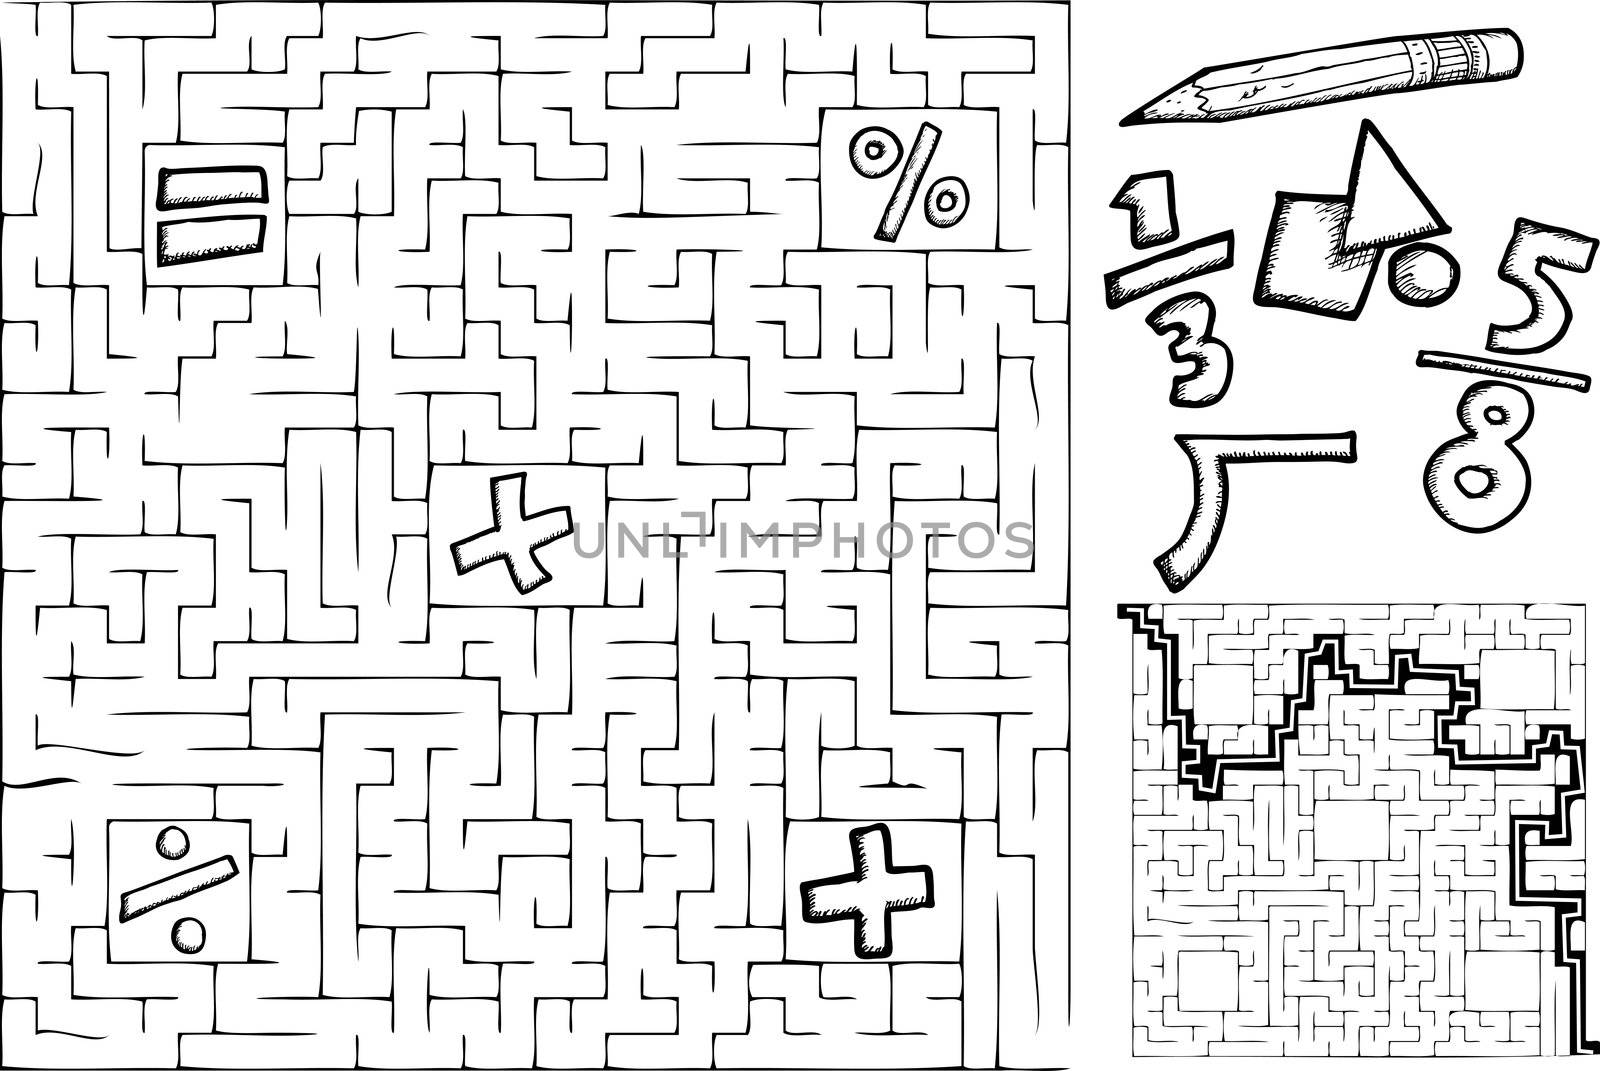 Coloring page math maze with interchangeable symbols with solution